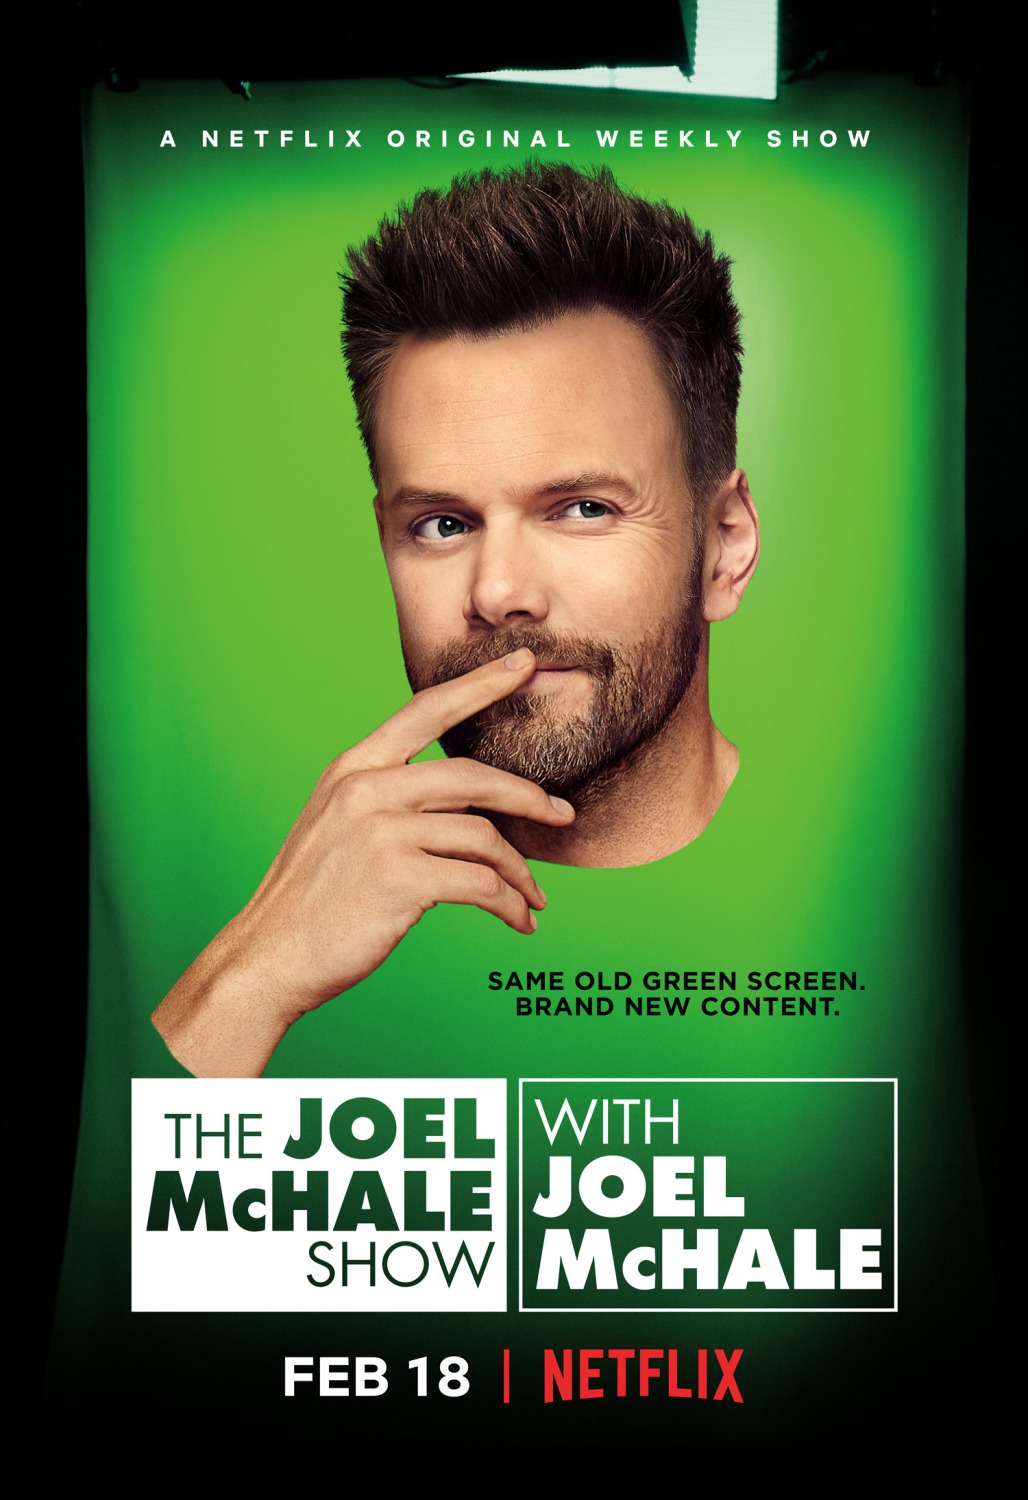 Extra Large TV Poster Image for The Joel McHale Show 